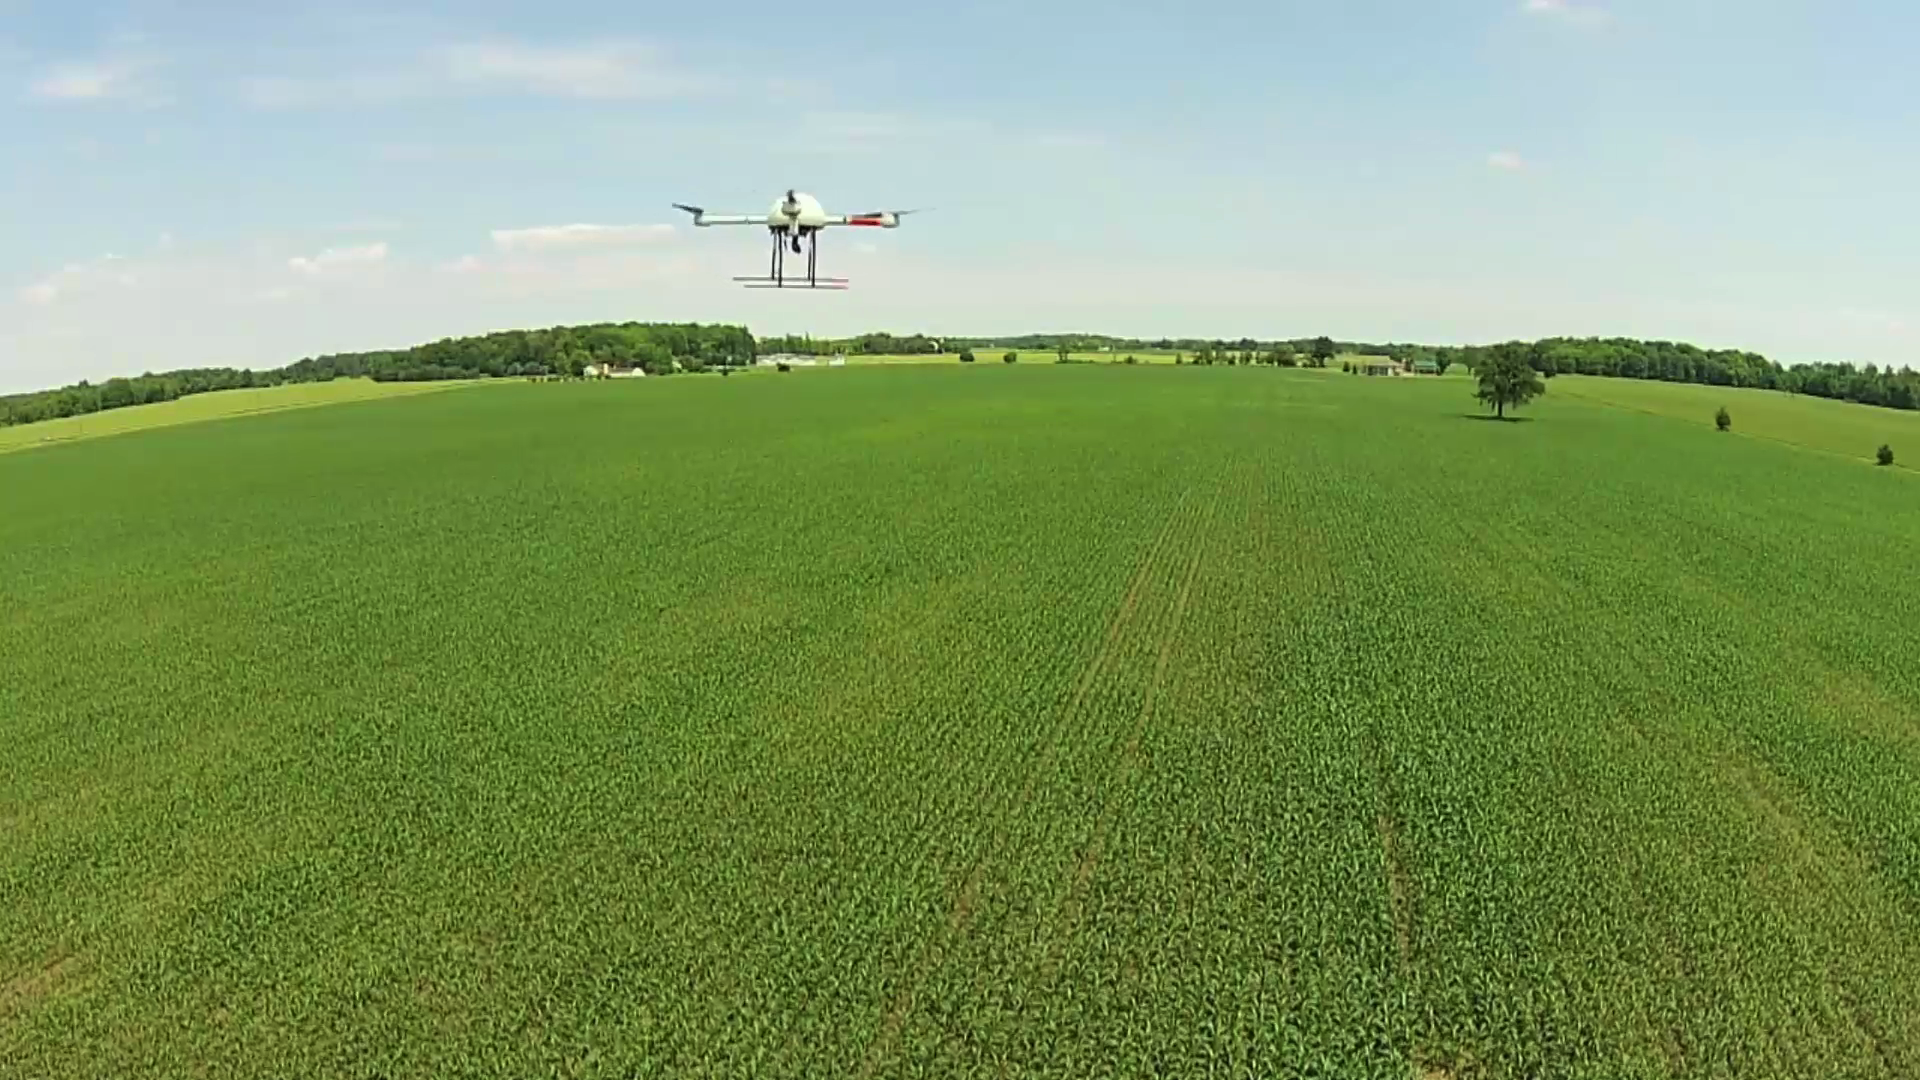 What Are The Different Types of Drones Used in Agriculture